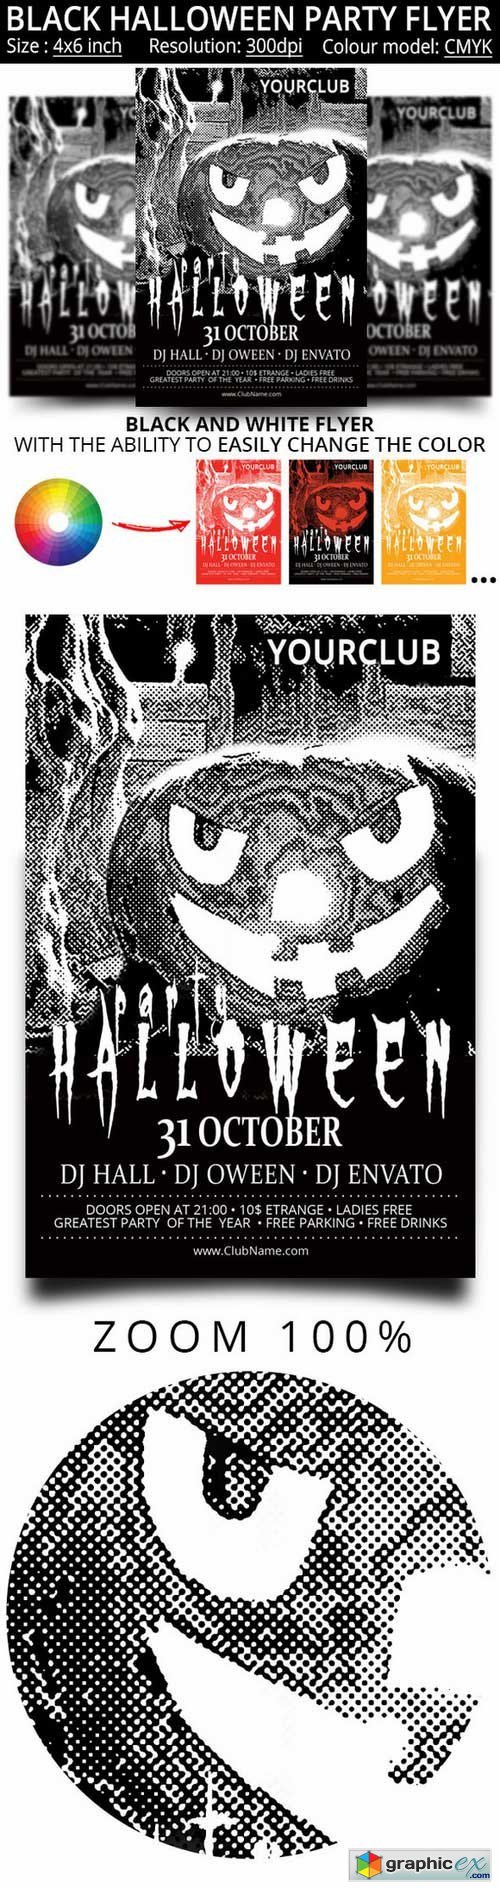 Black and white flyer for the Hallow